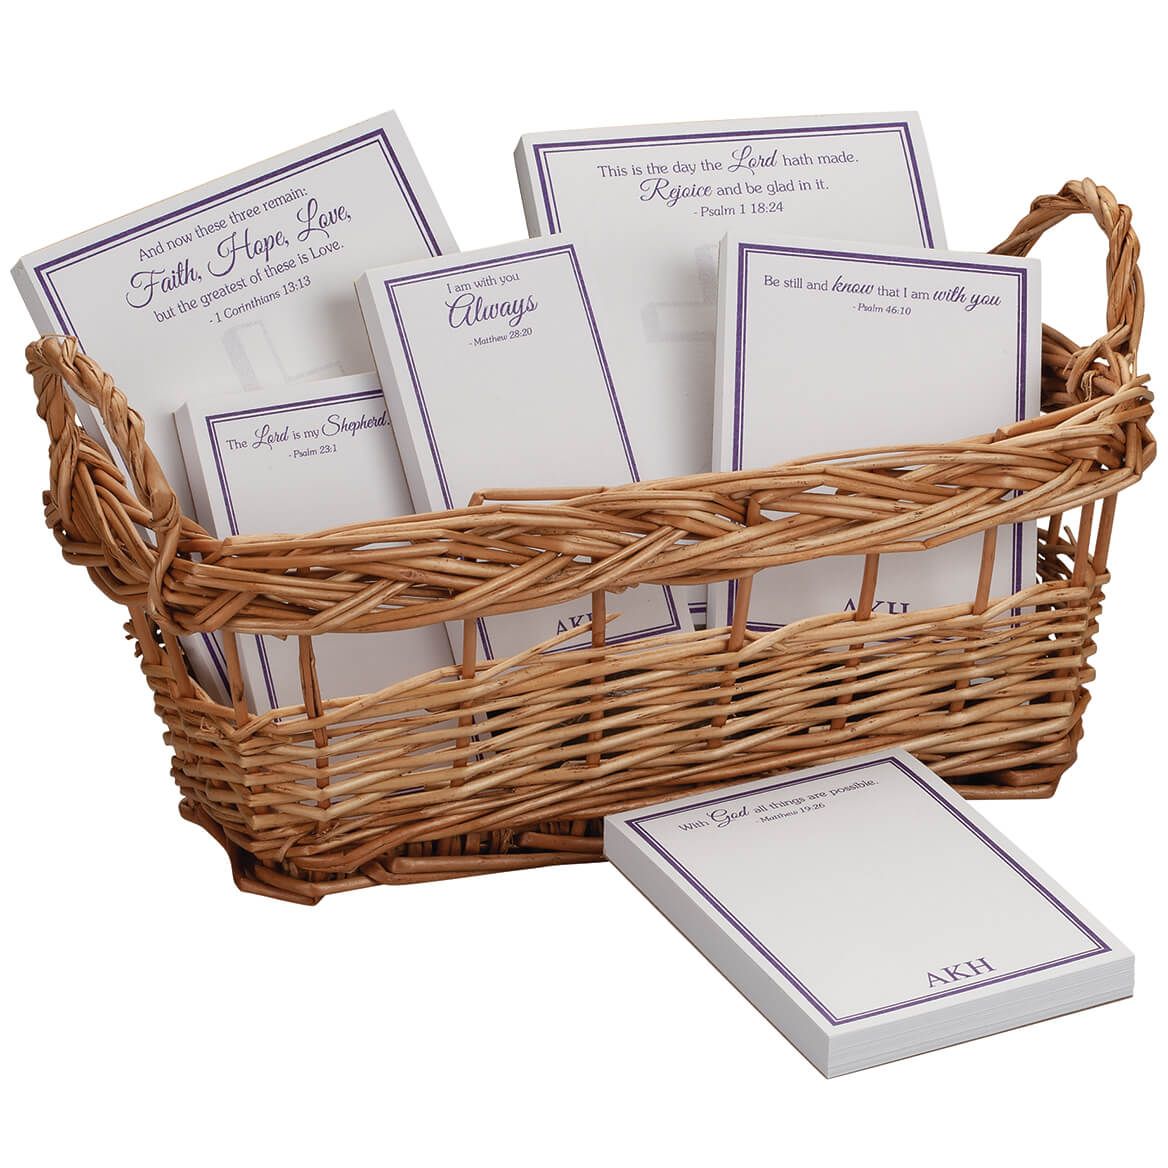 Personalized Basketful of Notes with Bible Quotes + '-' + 371296